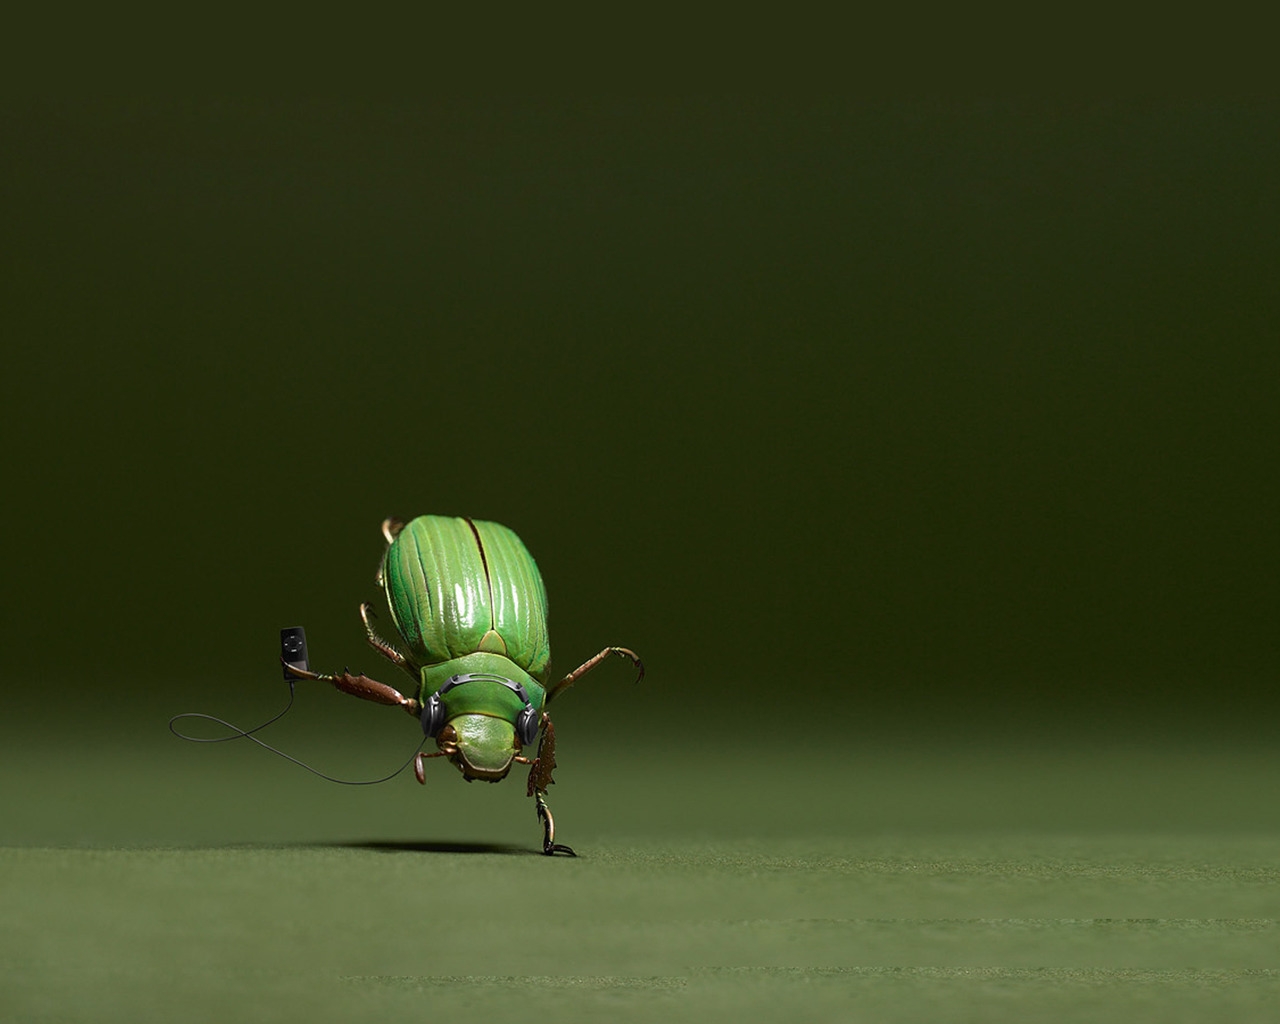 Dancing Bug for 1280 x 1024 resolution